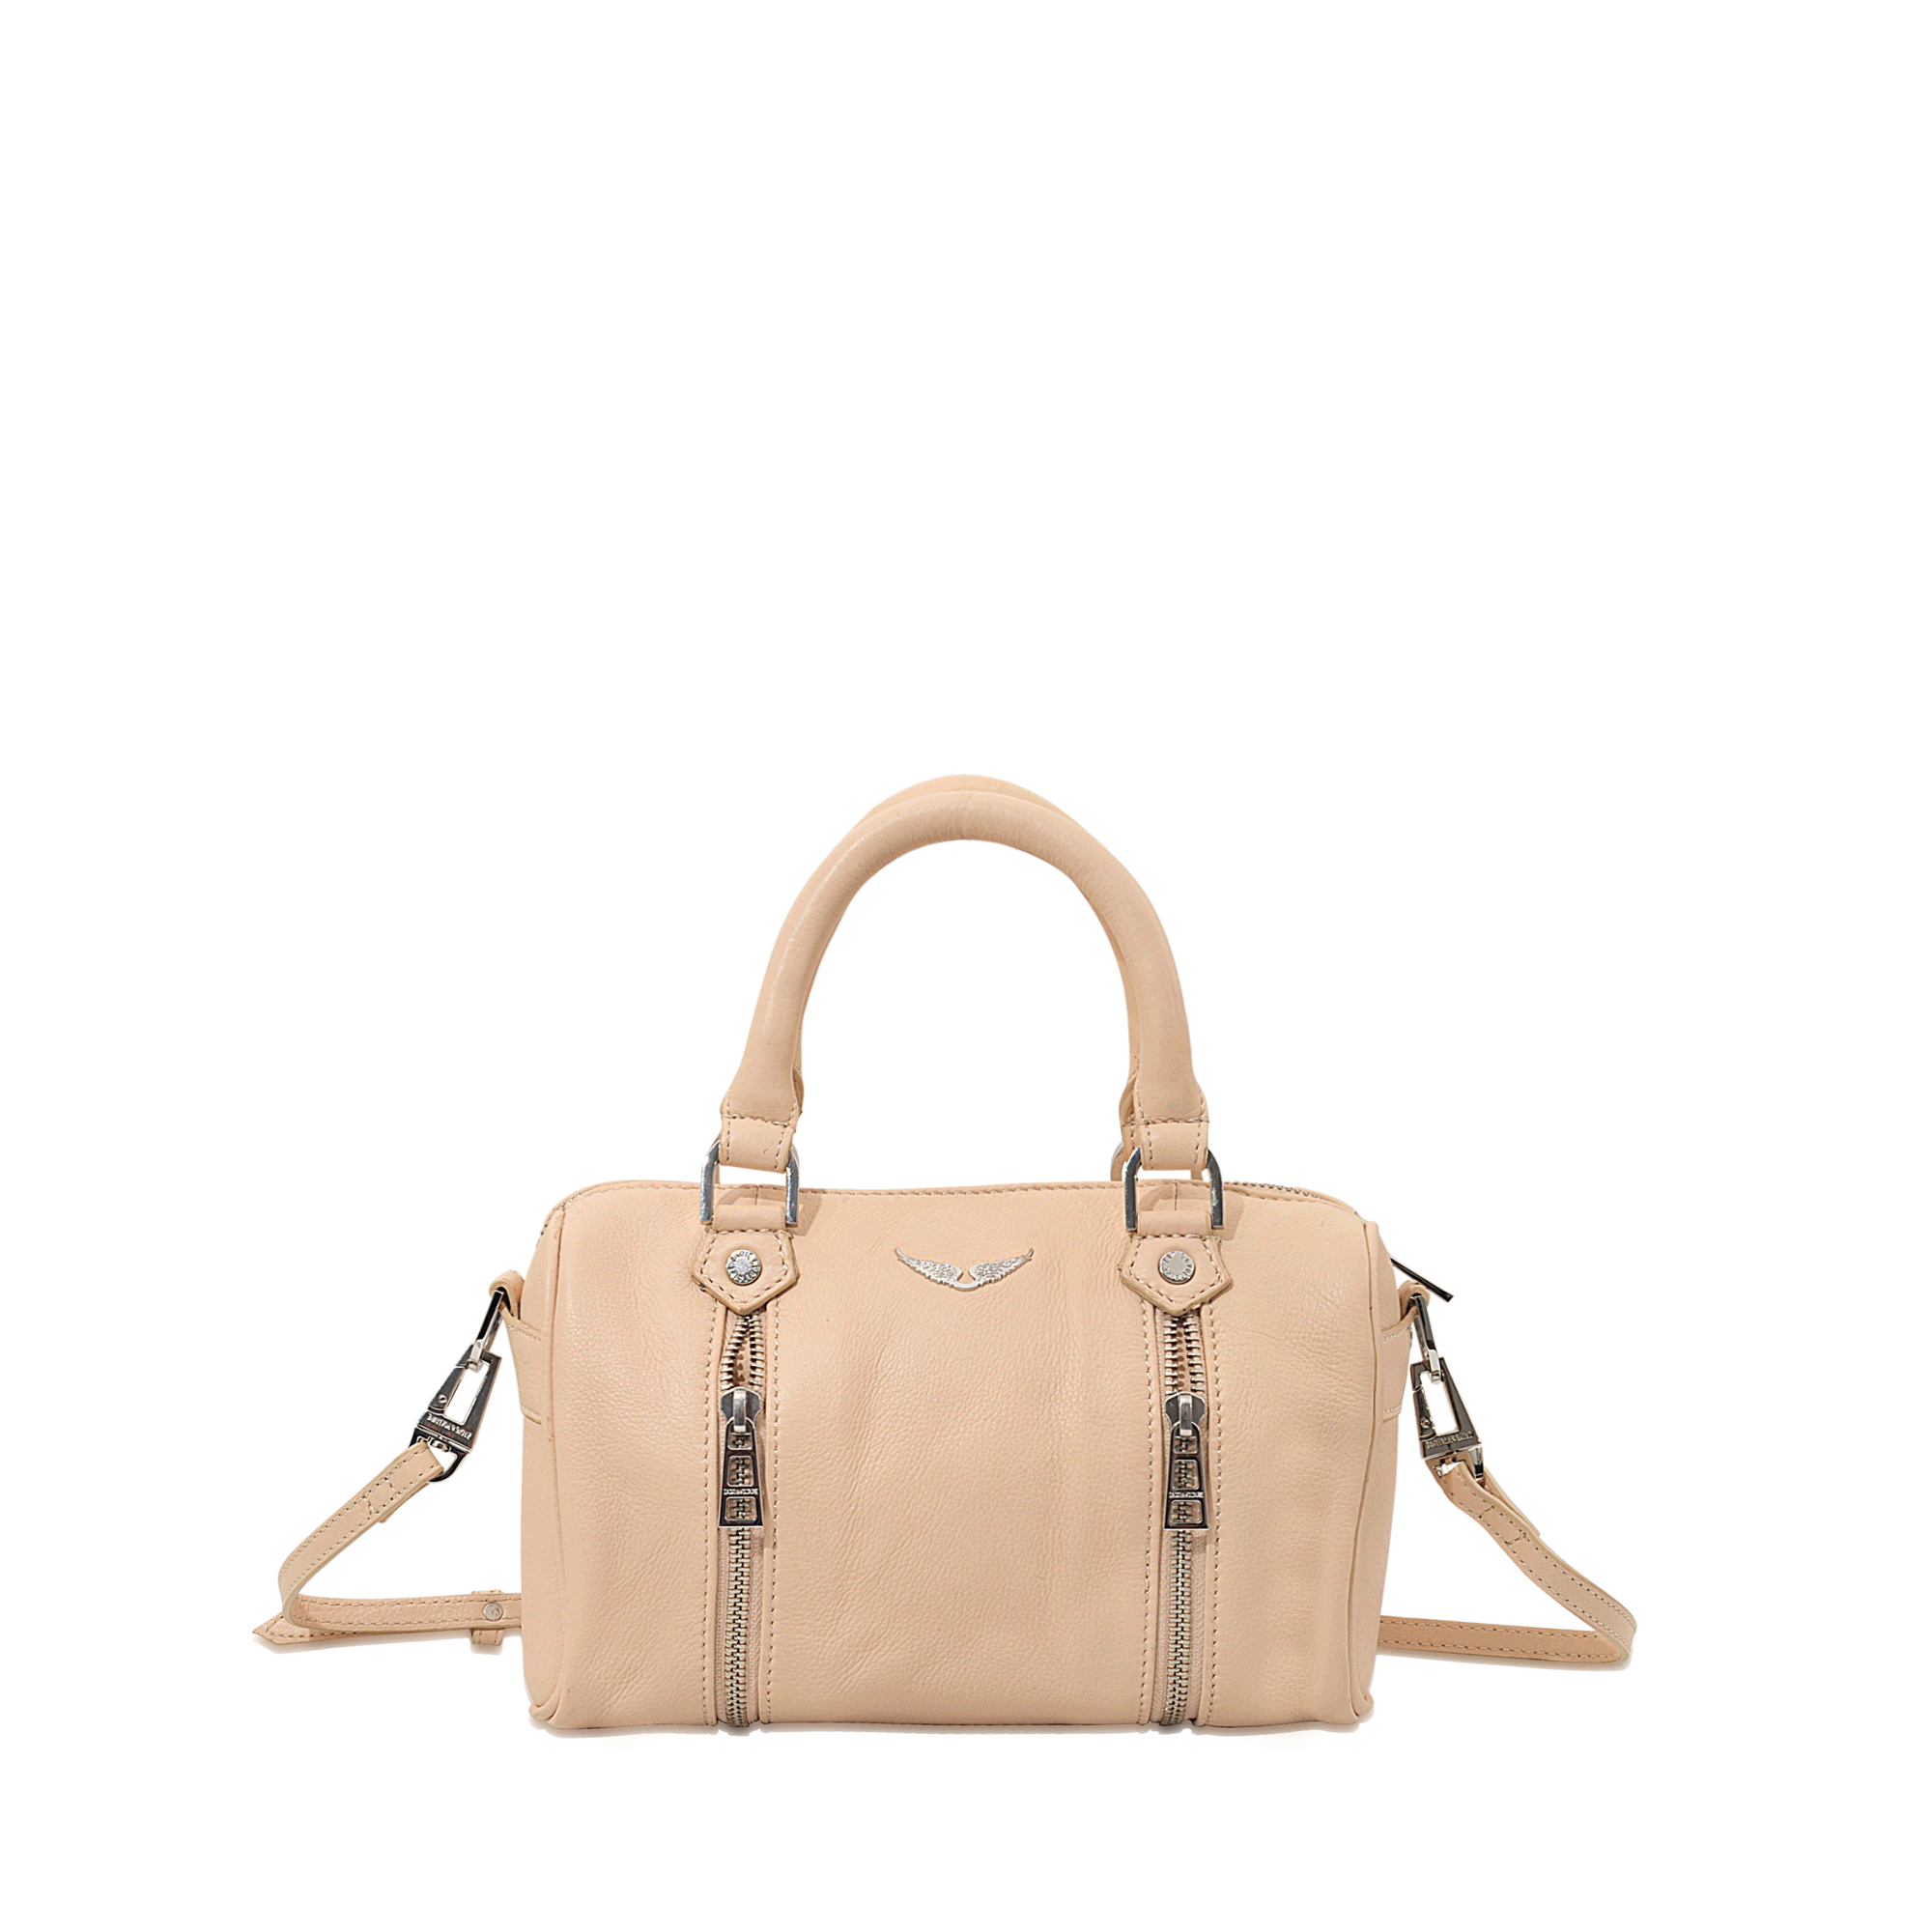 Zadig & Voltaire Xs Sunny Bag in Natural - Lyst